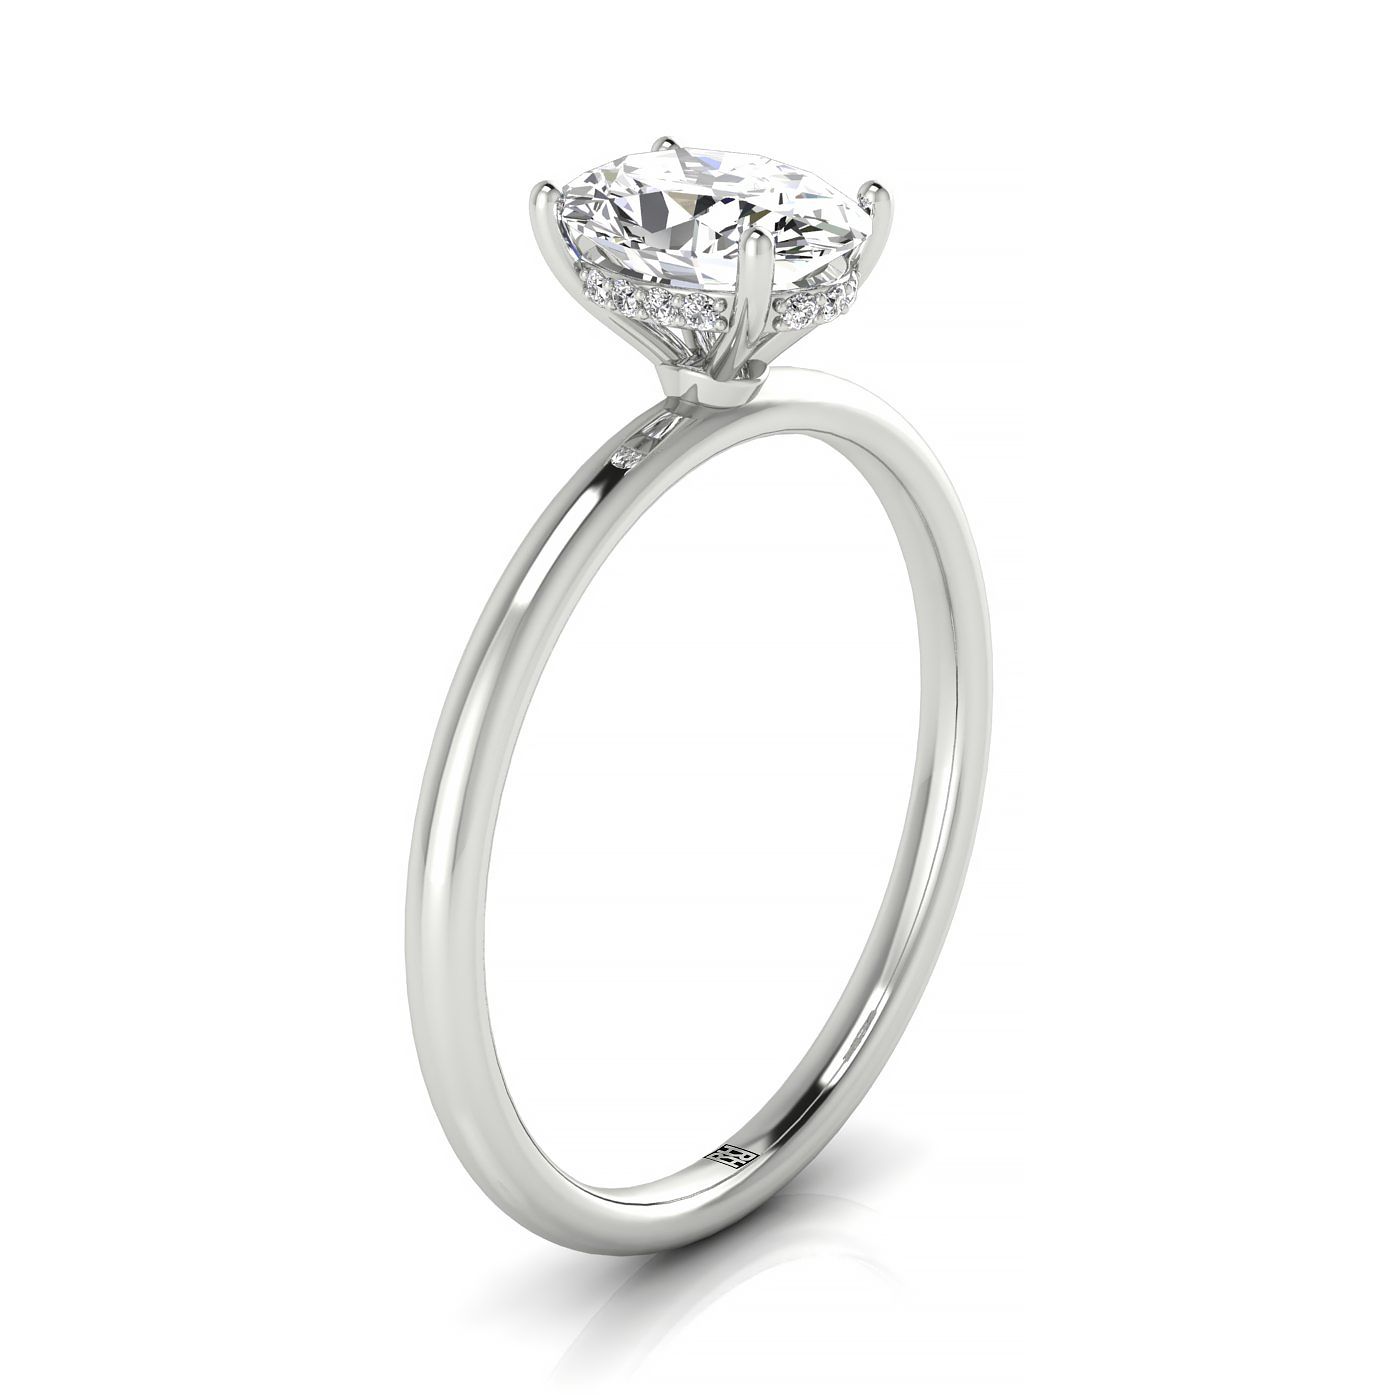 Plat Oval Solitaire Engagement Ring With Upper Hidden Halo With 16 Prong Set Round Diamonds